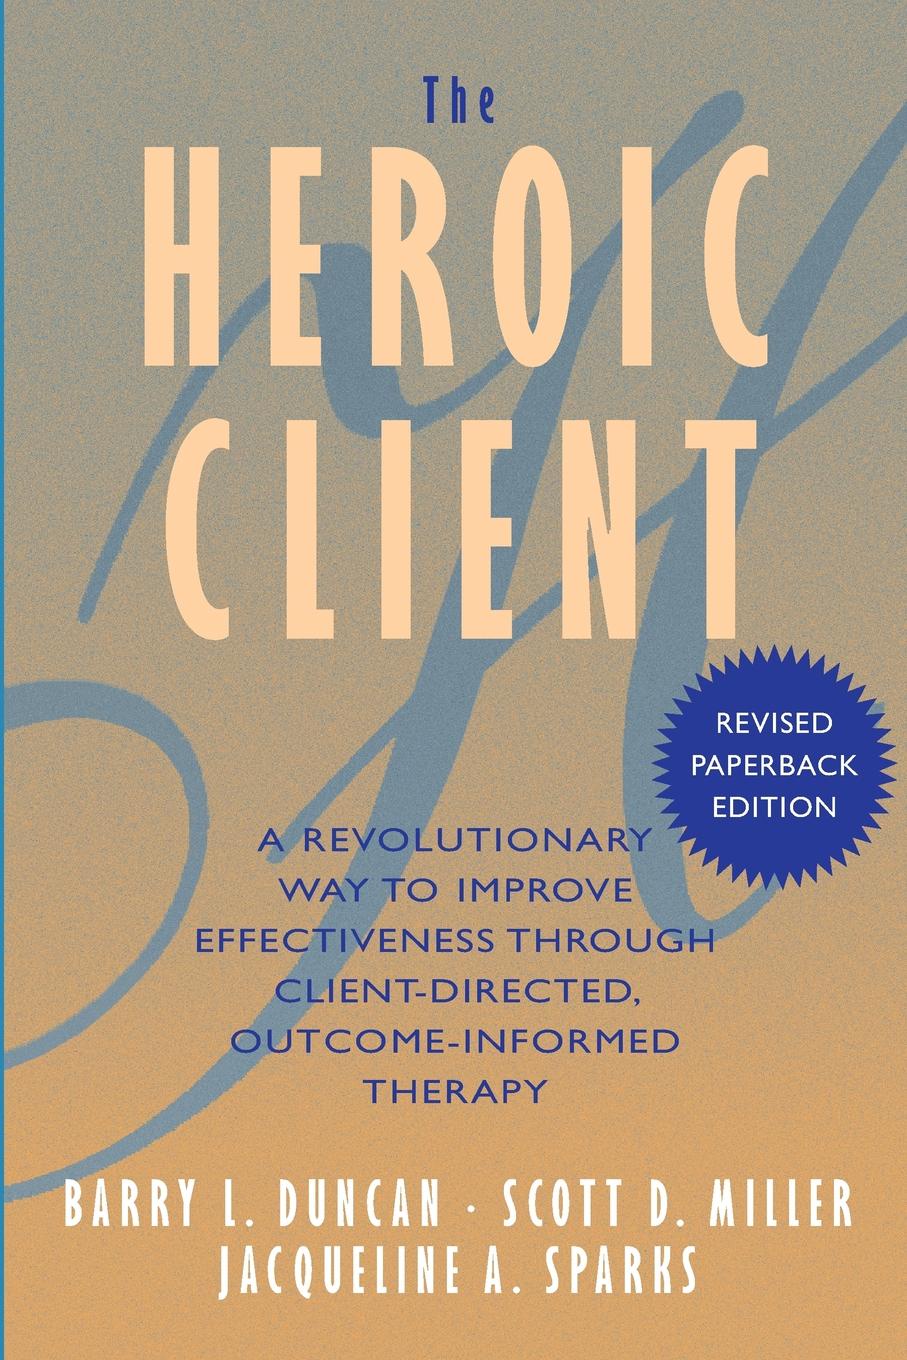 The Heroic Client. A Revolutionary Way to Improve Effectiveness Through Client-Directed, Outcome-Informed Therapy